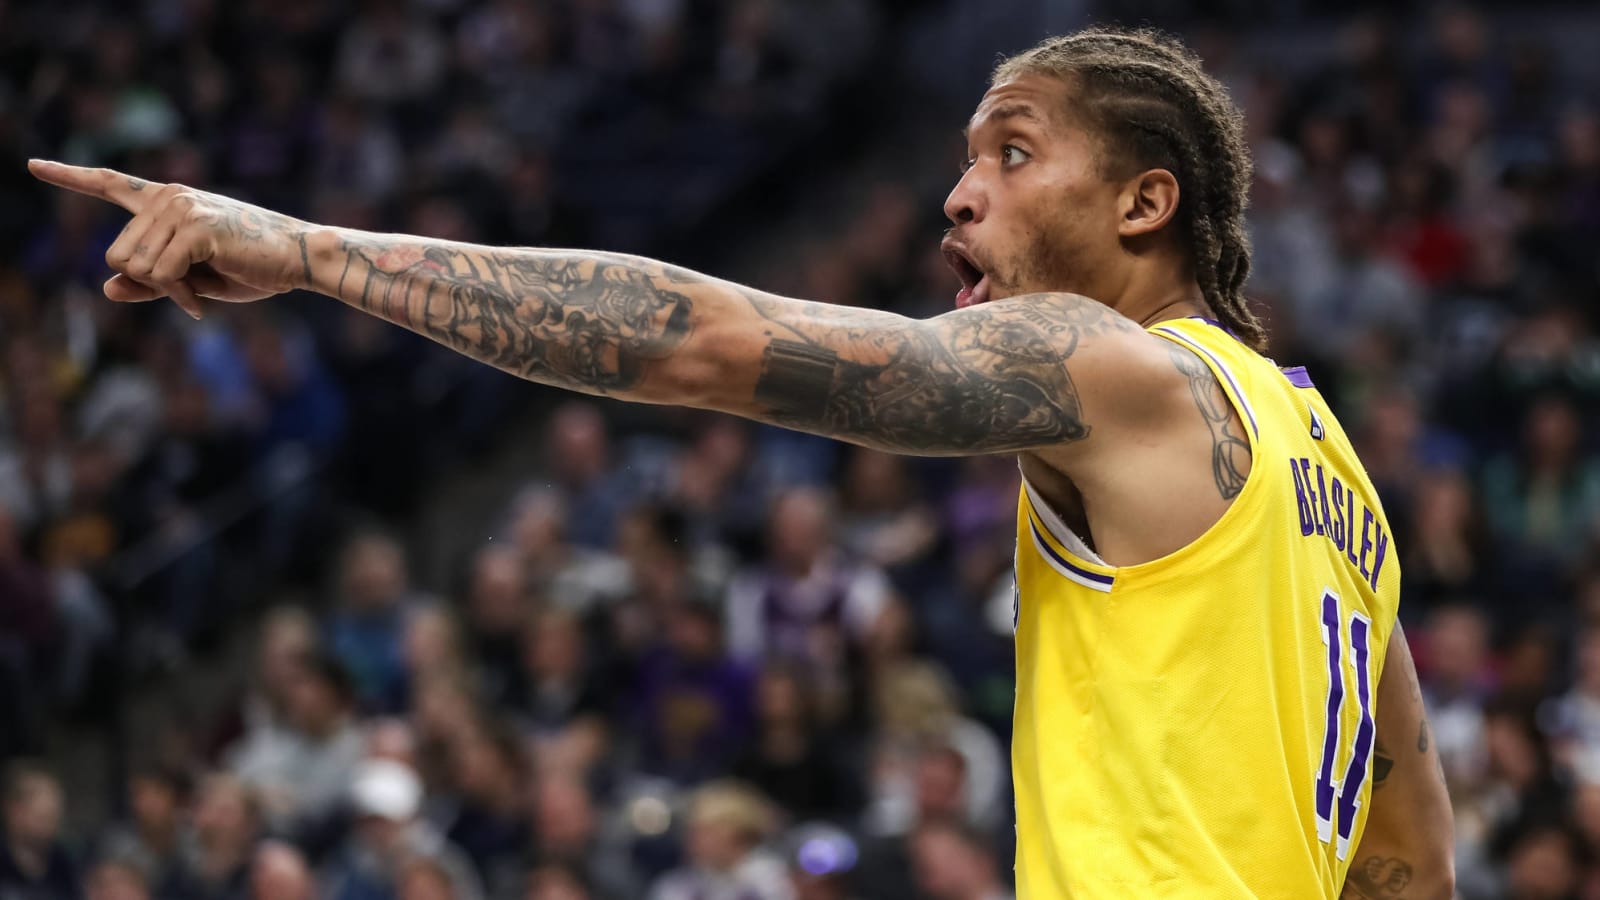 Nets will replace Michael Beasley after he tested positive for COVID-19